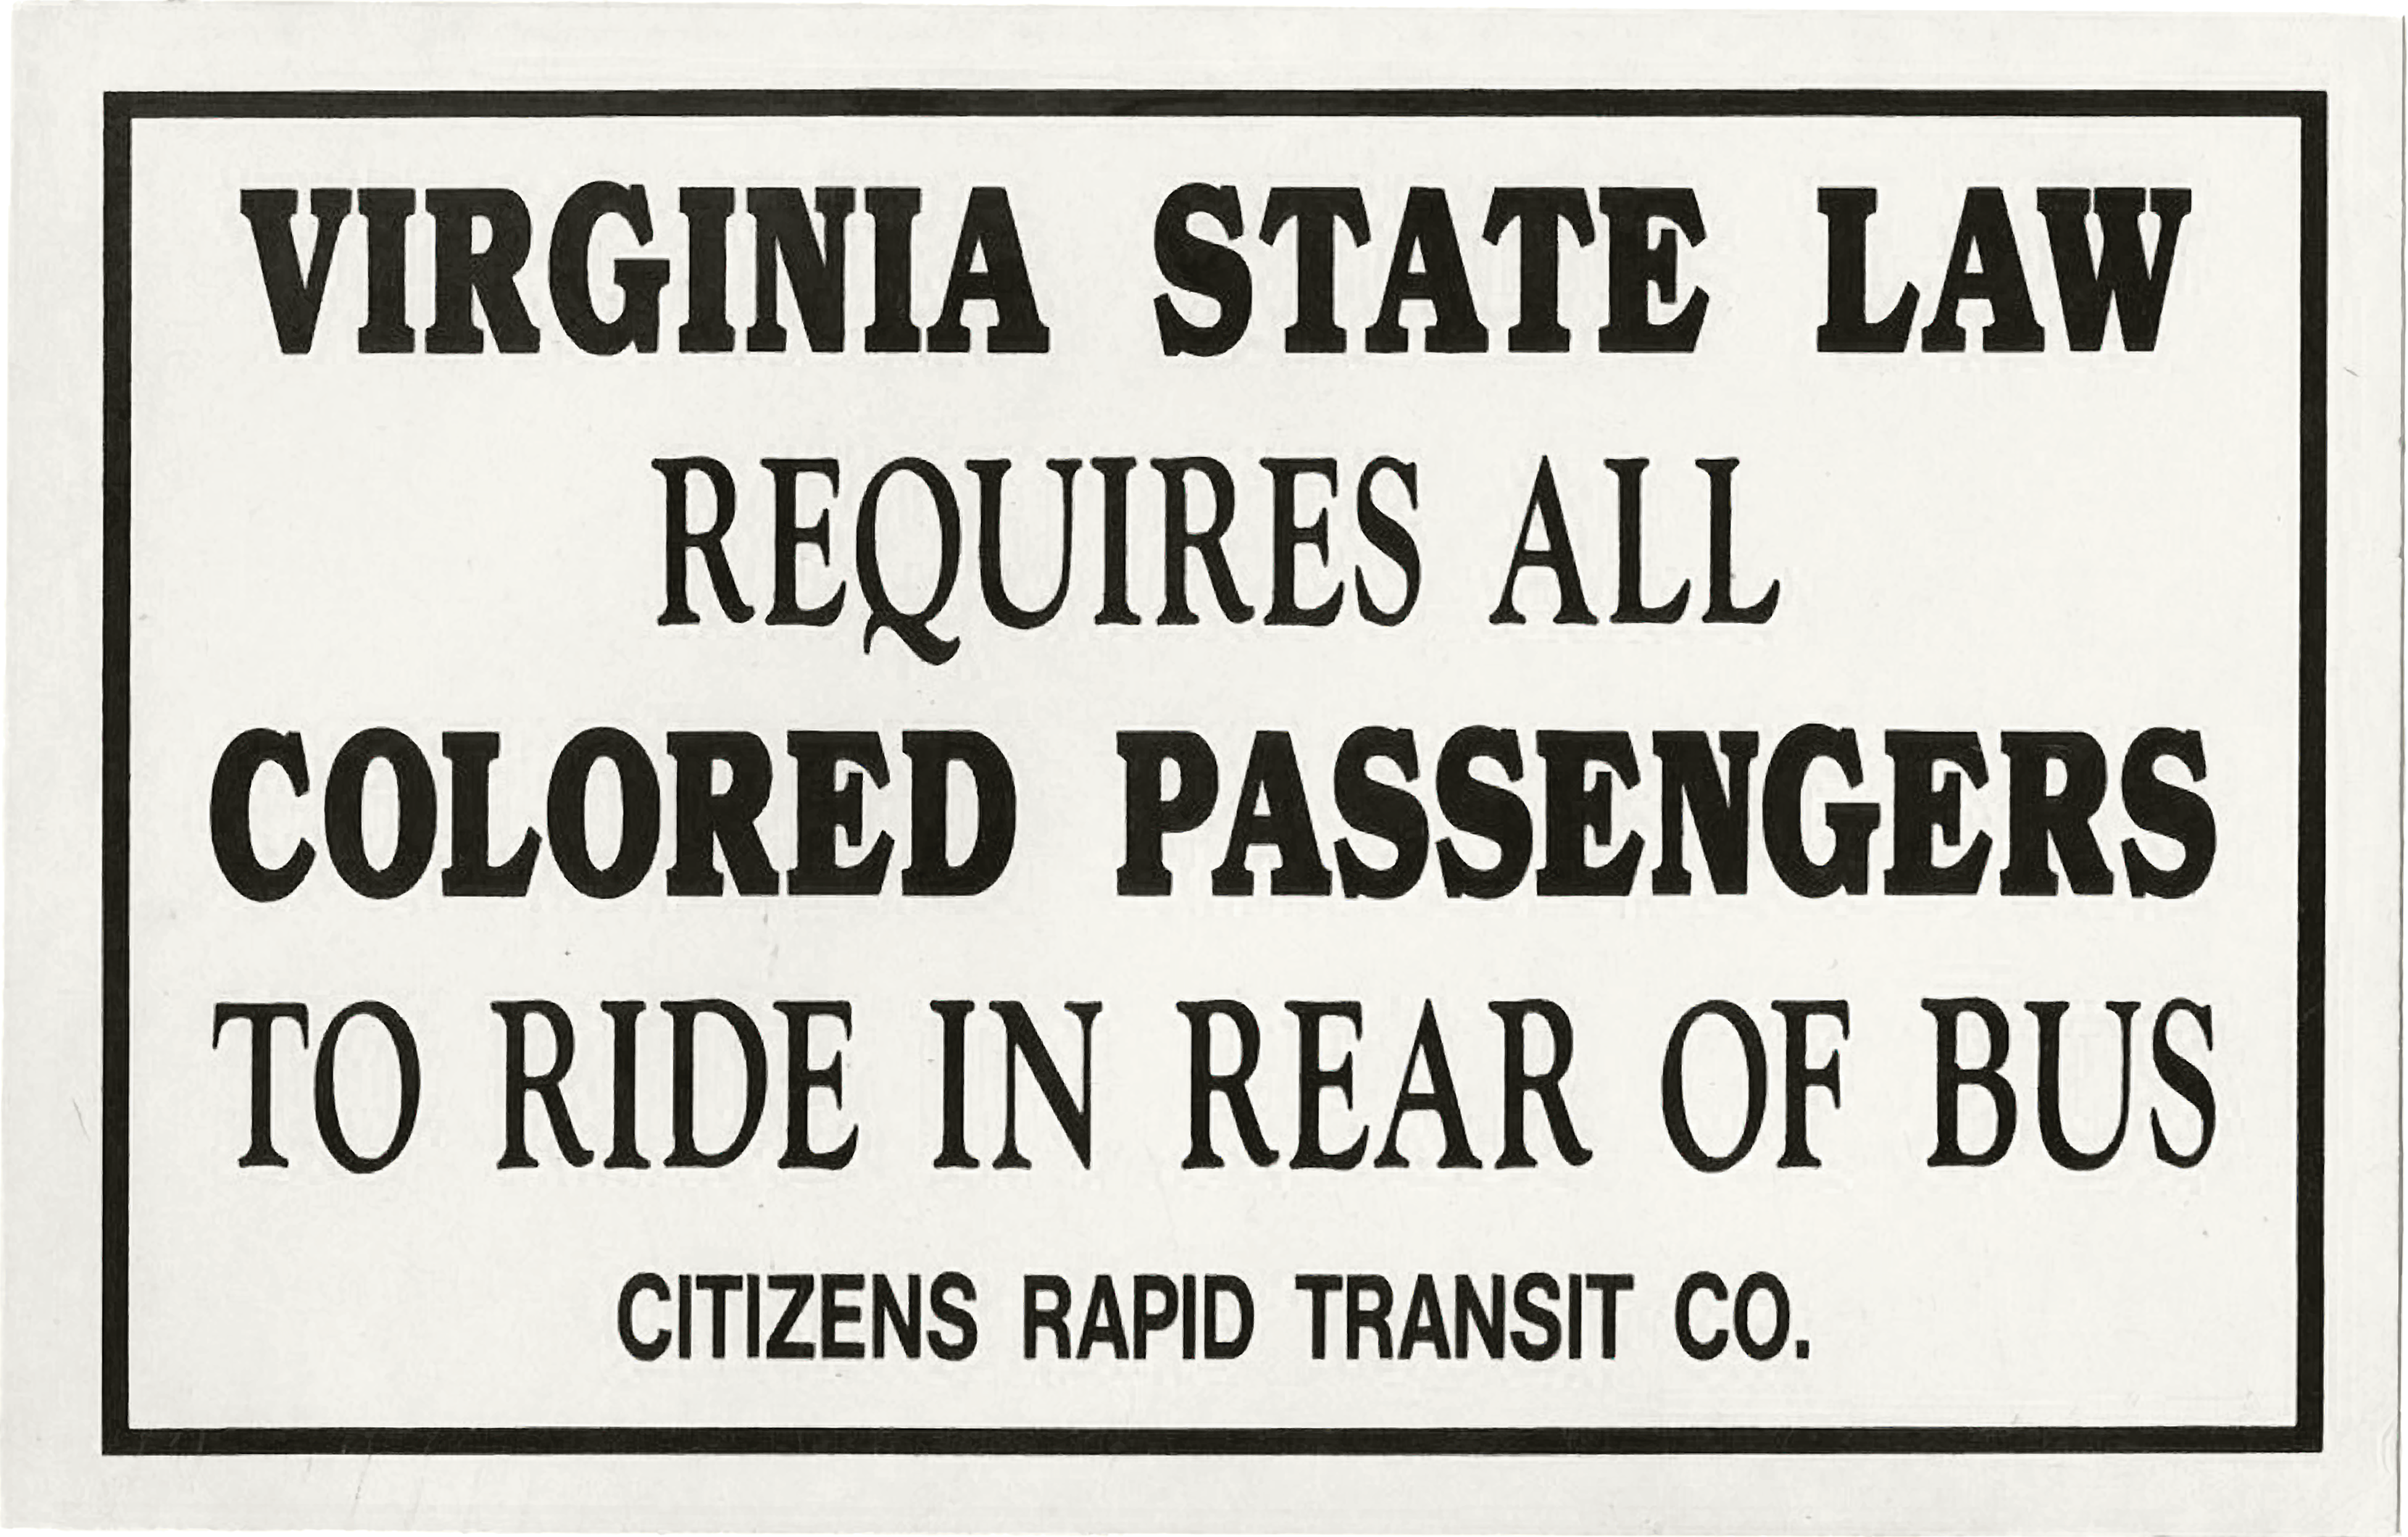 Notice, from the 1950’s, that Virginia state law mandates racial segregation of buses. Source: Library of Virginia.